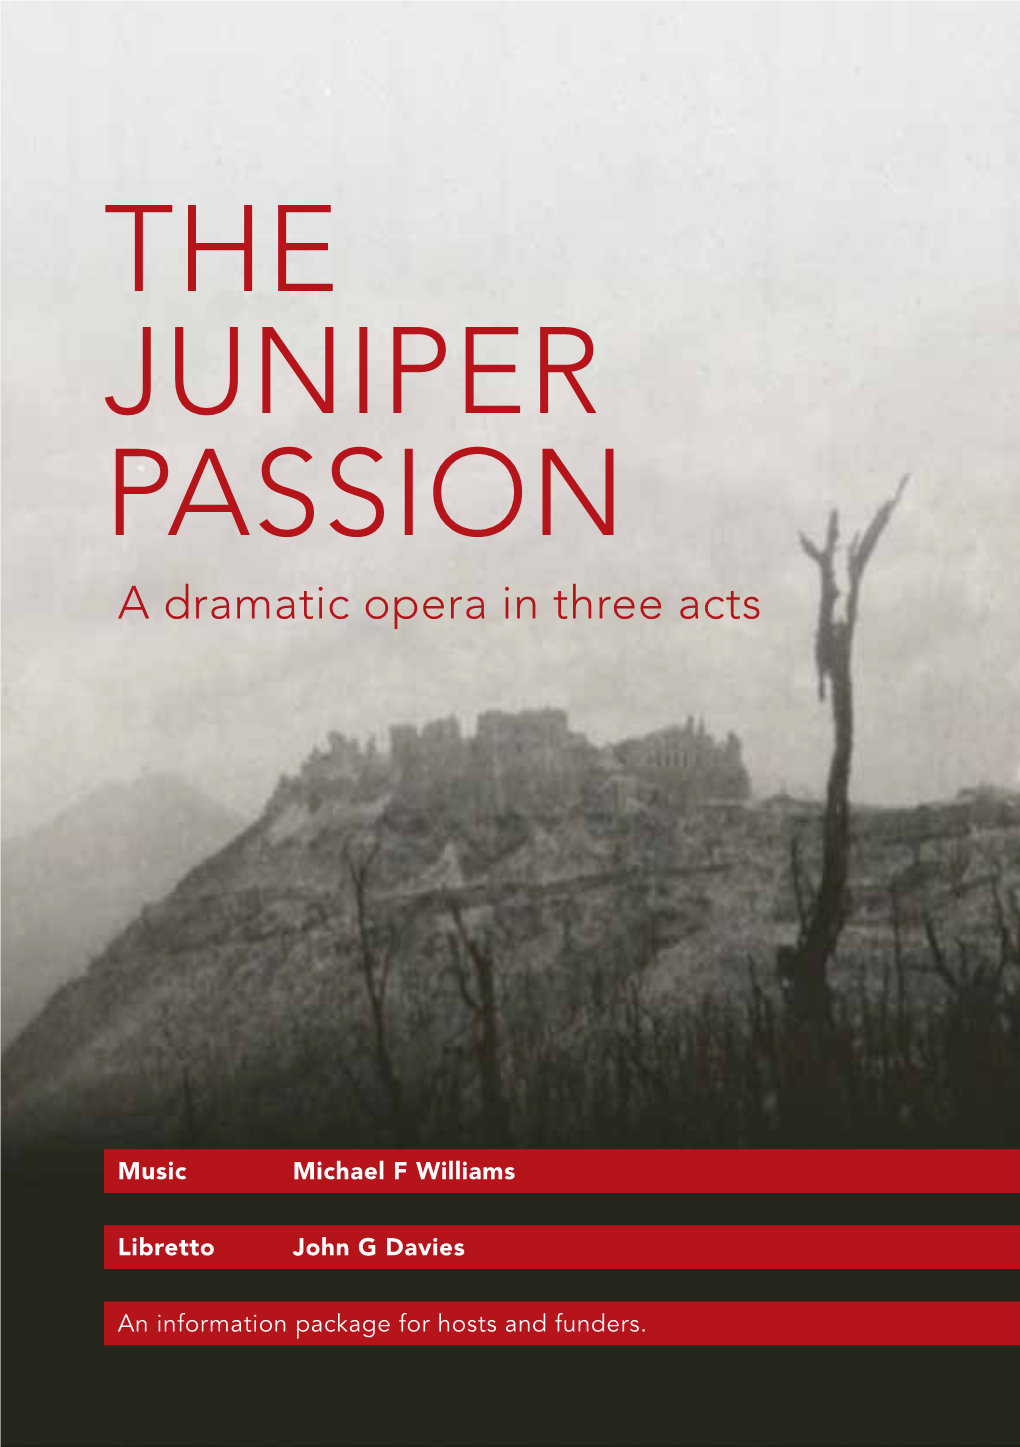 THE JUNIPER PASSION a Dramatic Opera in Three Acts